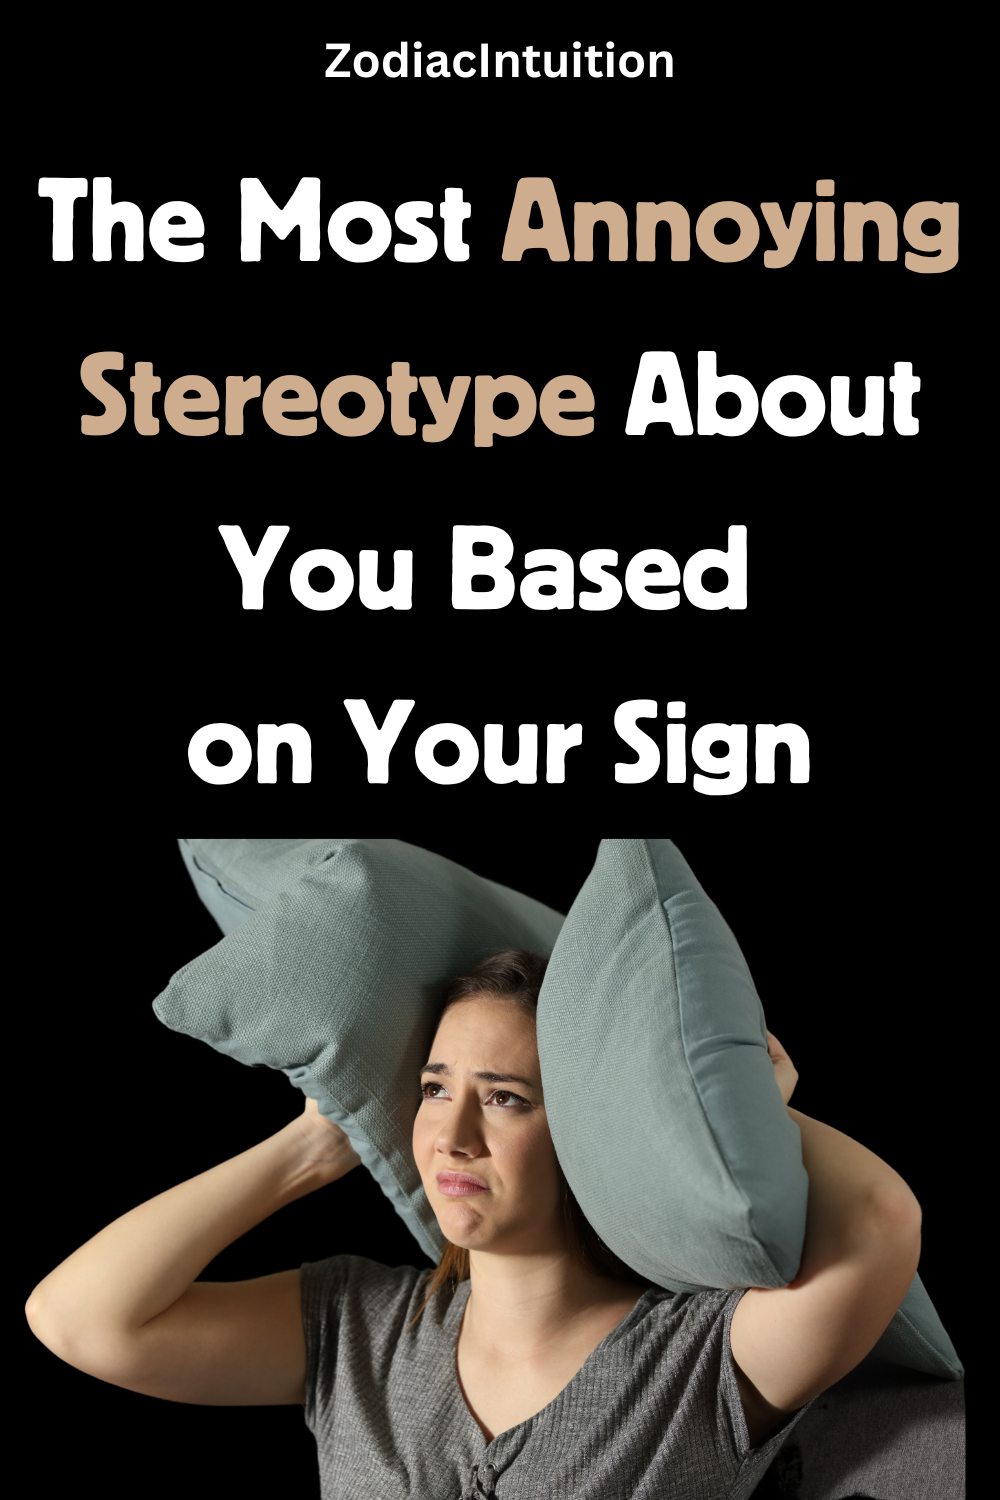 The Most Annoying Stereotype About You Based on Your Sign